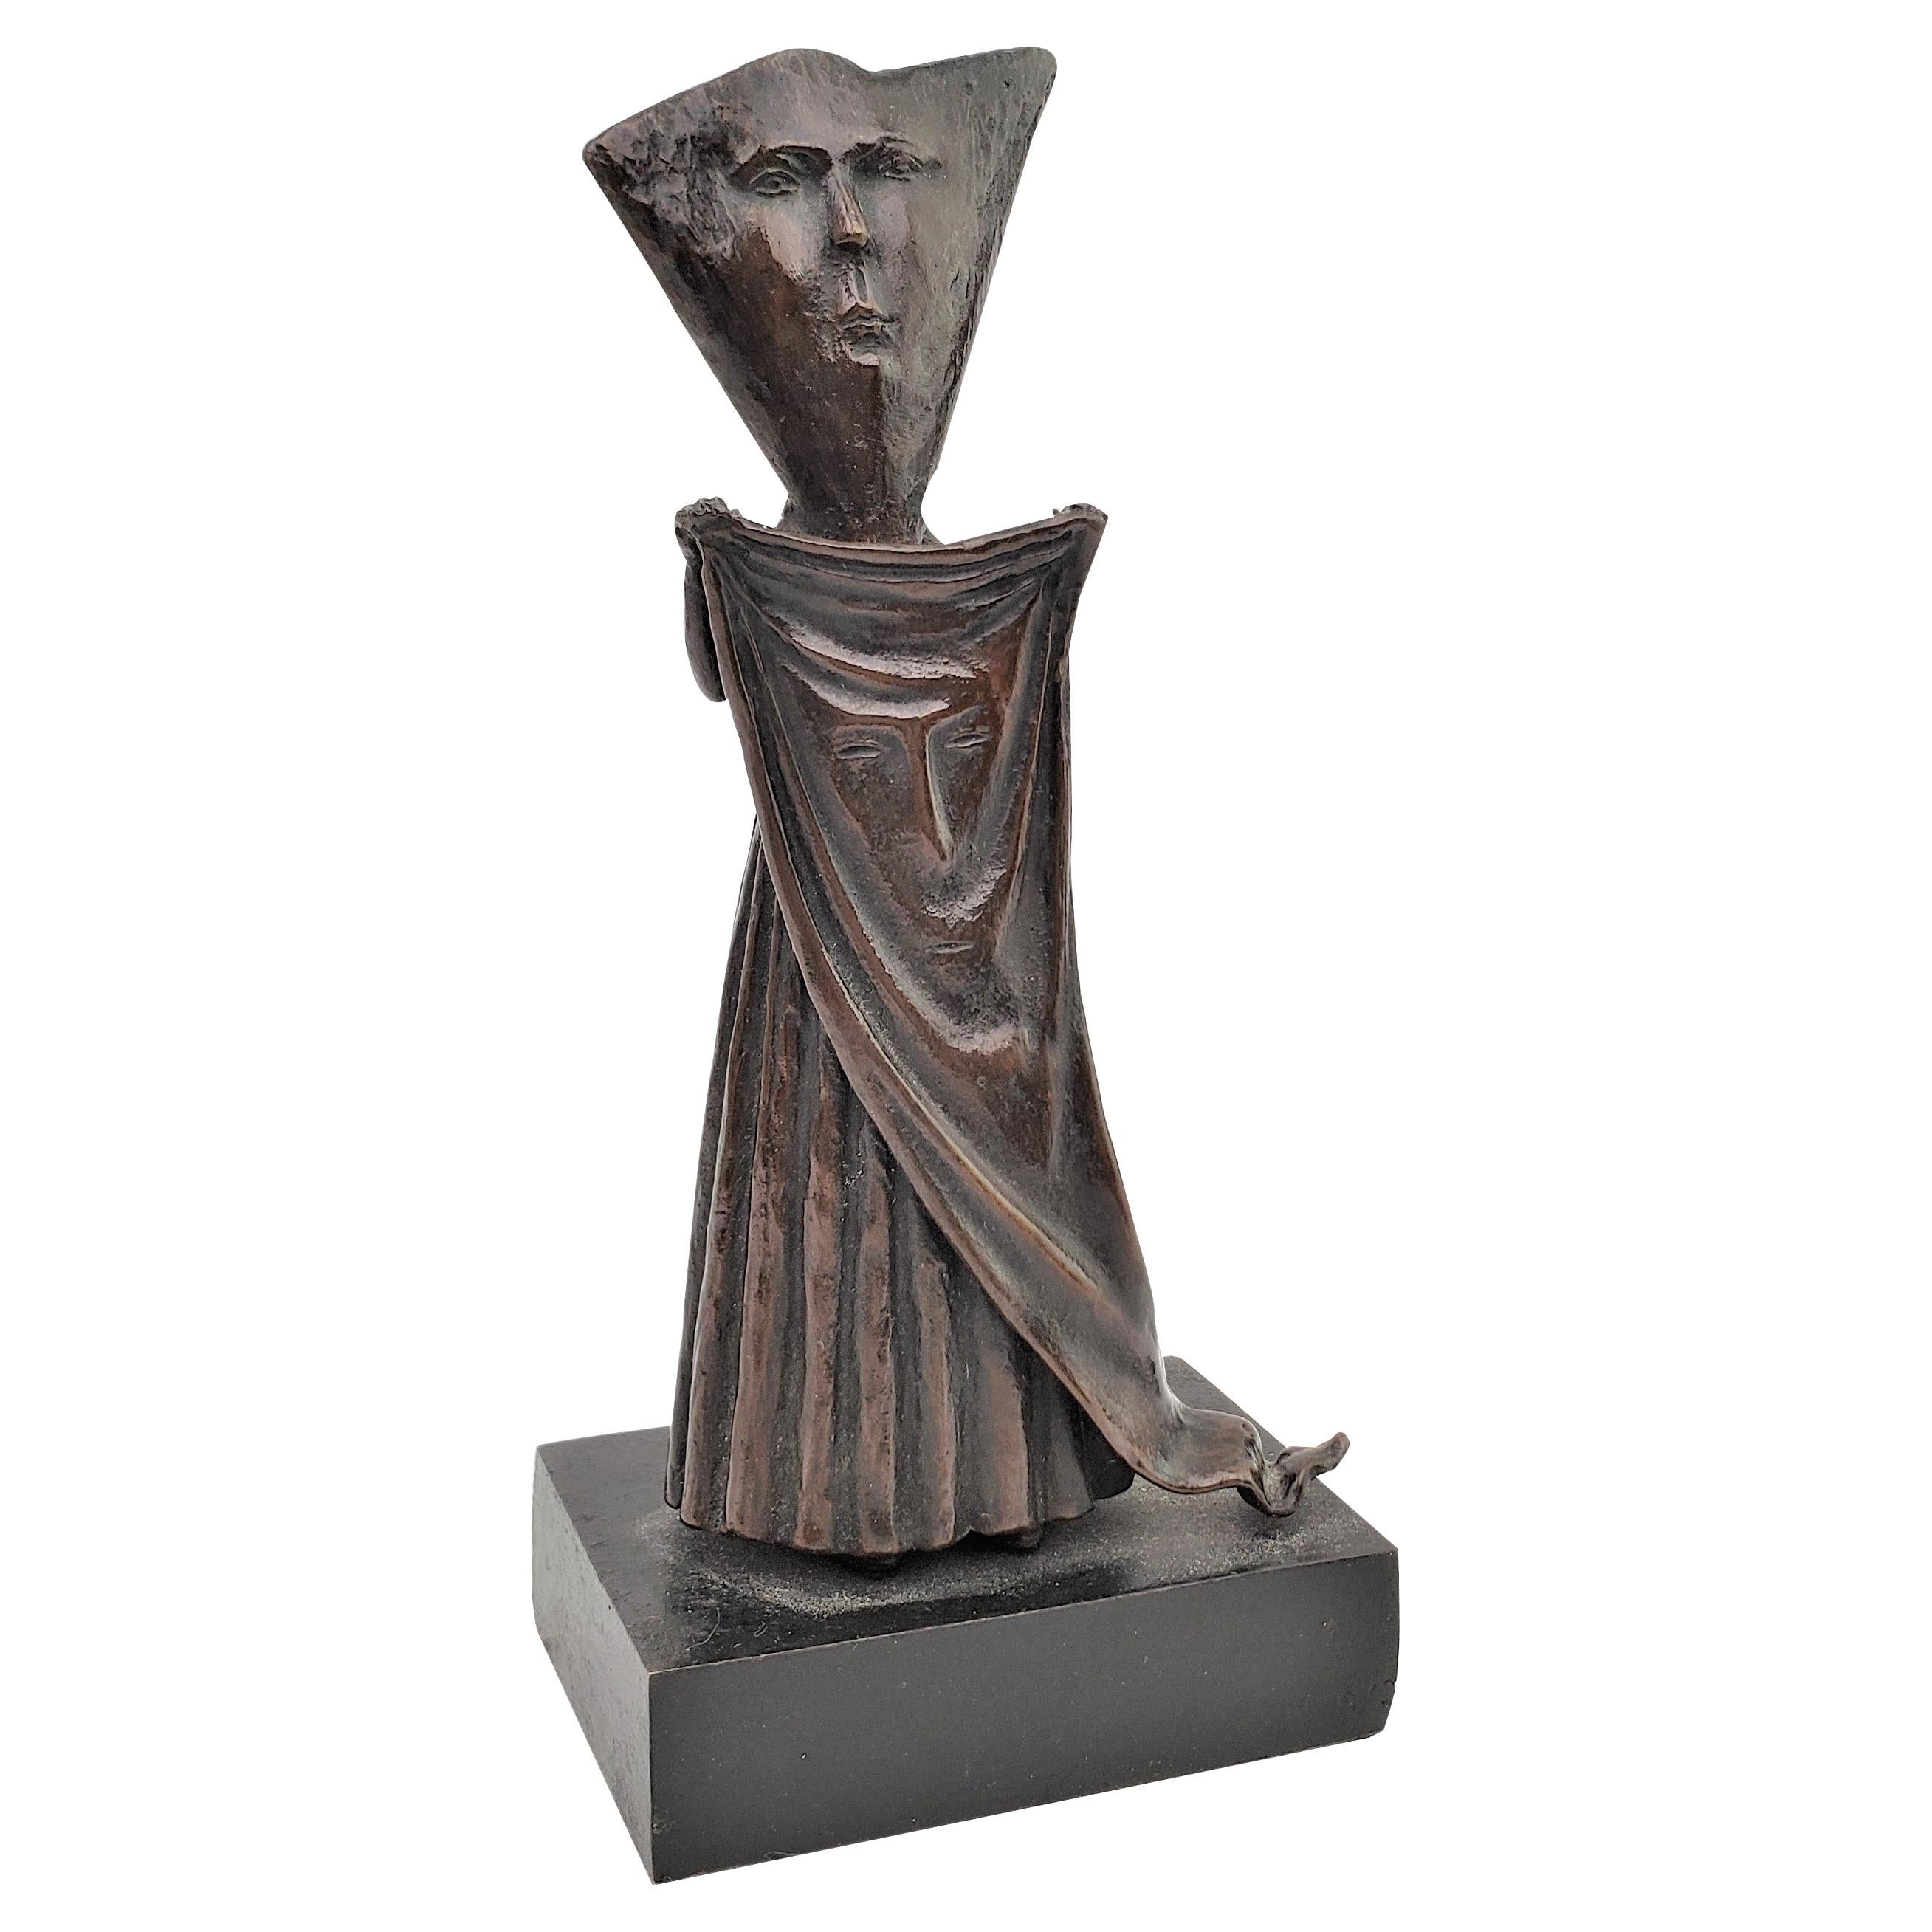 Signed Sergio Bustamante Stylized Robed Figurative Bronze Sculpture #103.200